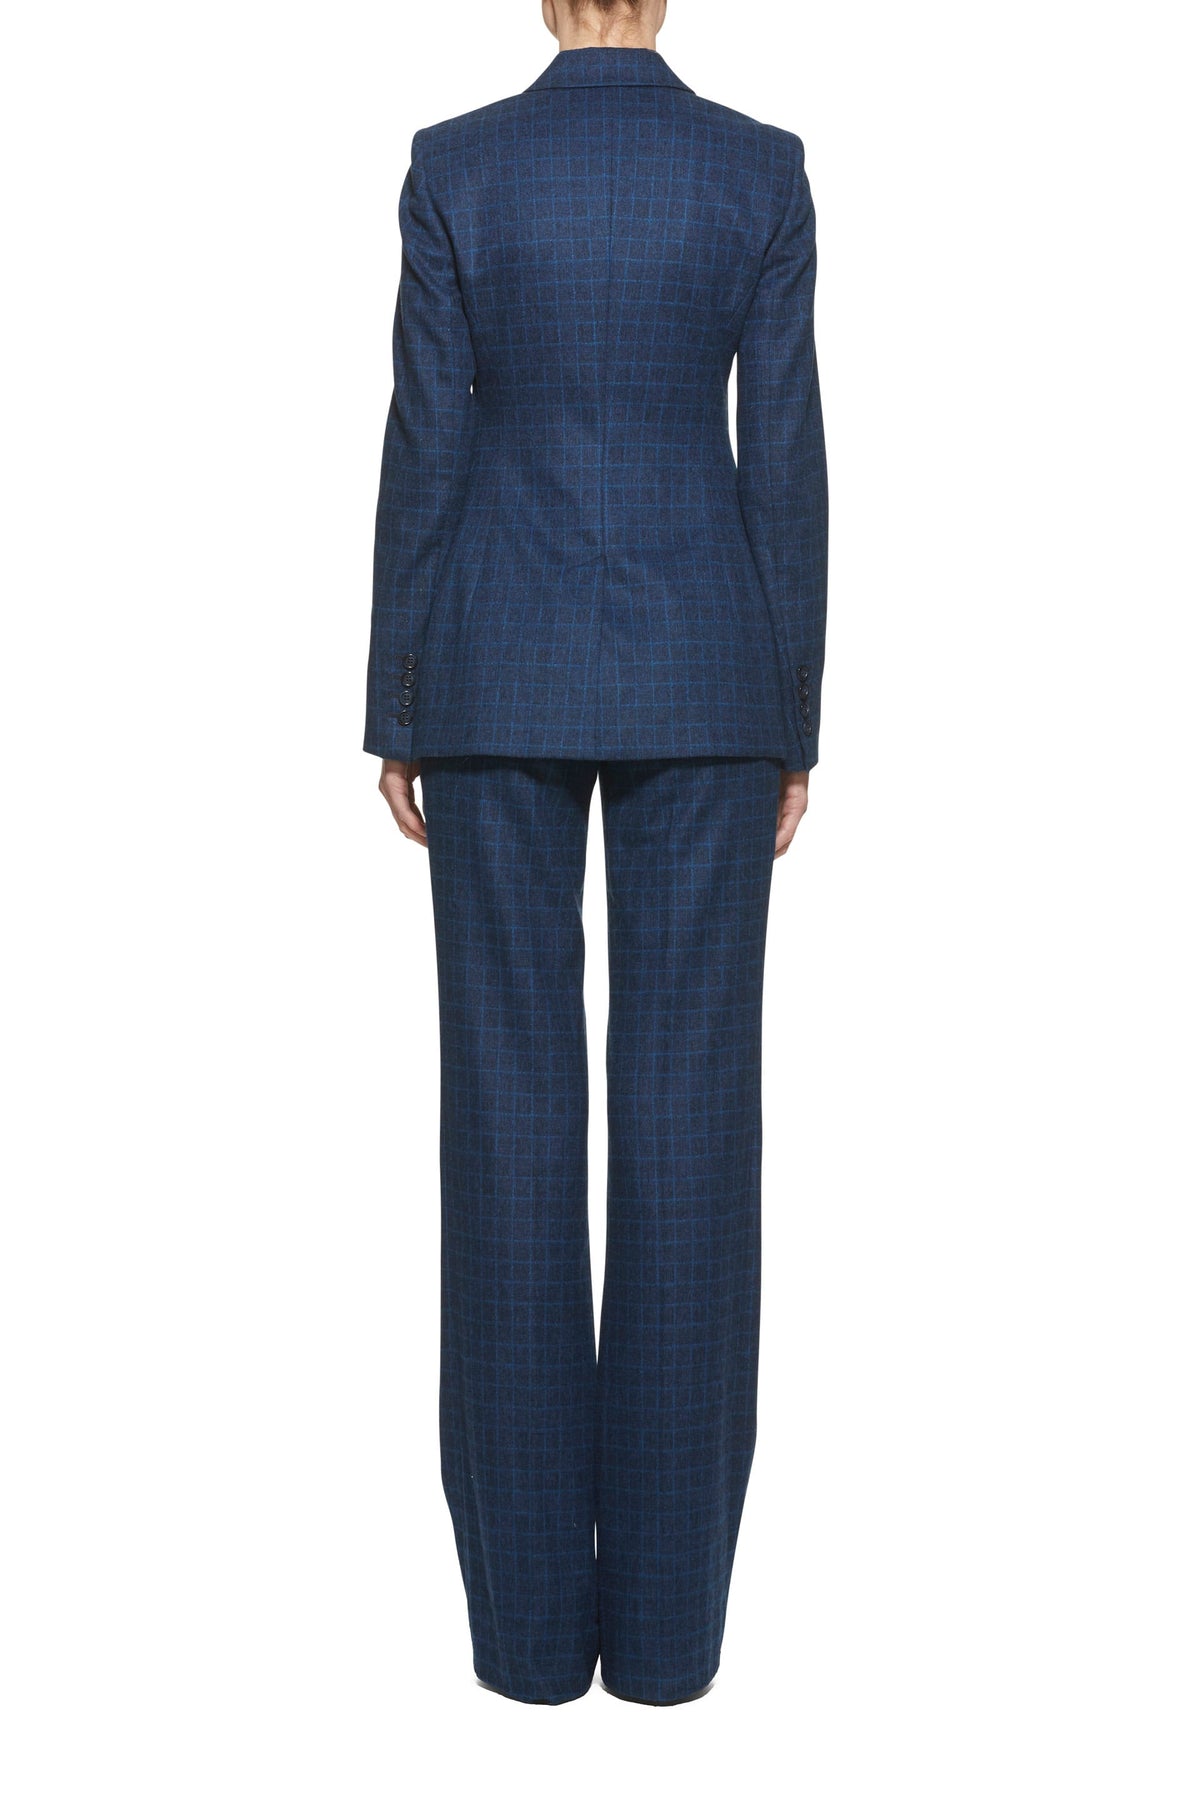 Torres Flare Pant in Cobalt Check Wool